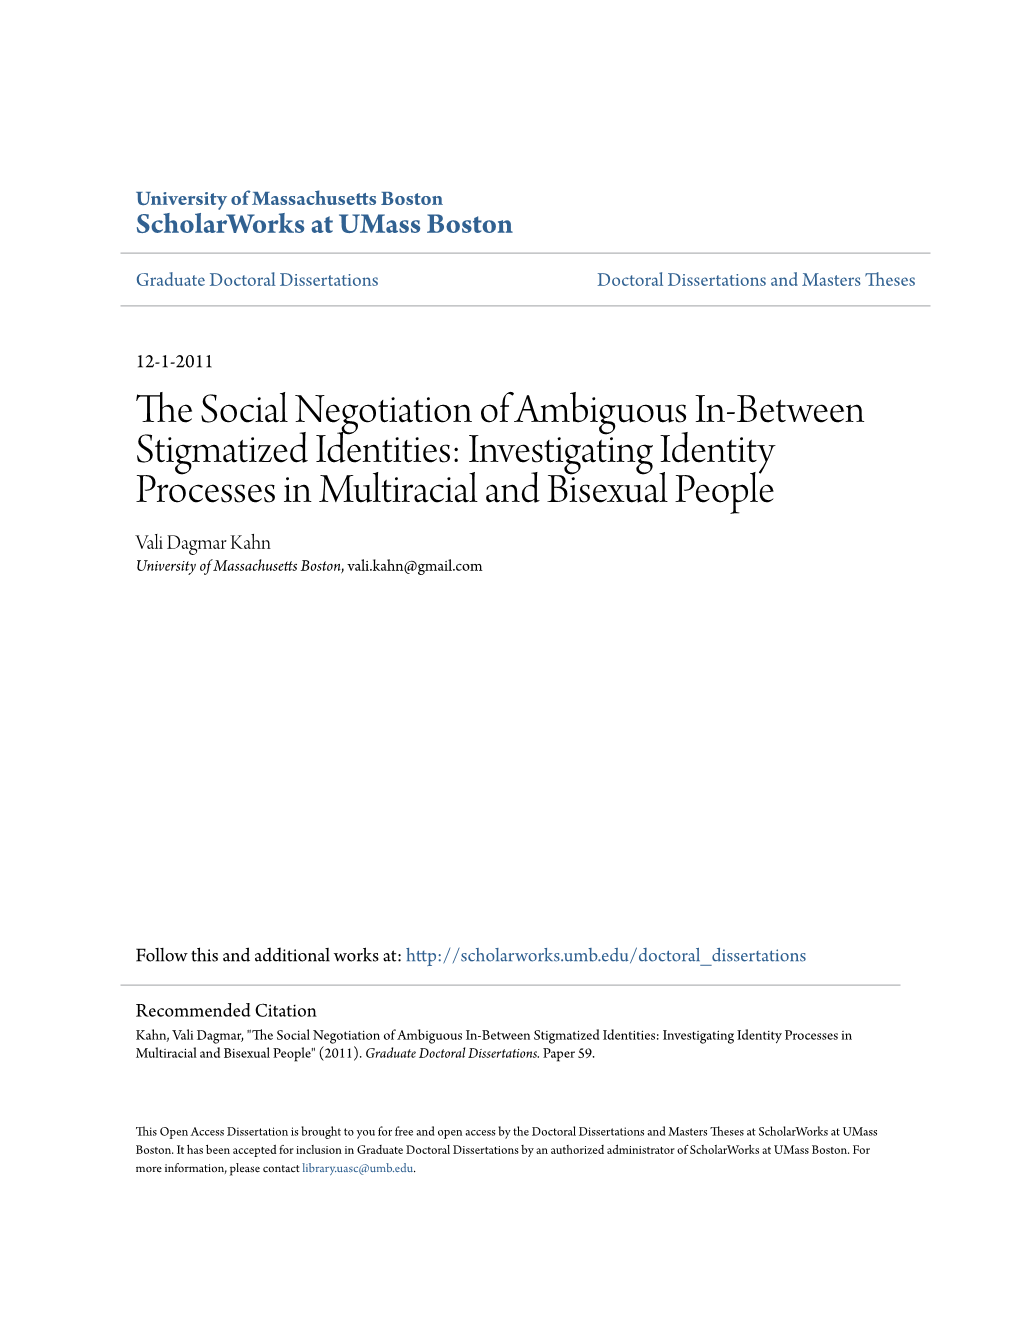 The Social Negotiation of Ambiguous In-Between Stigmatized